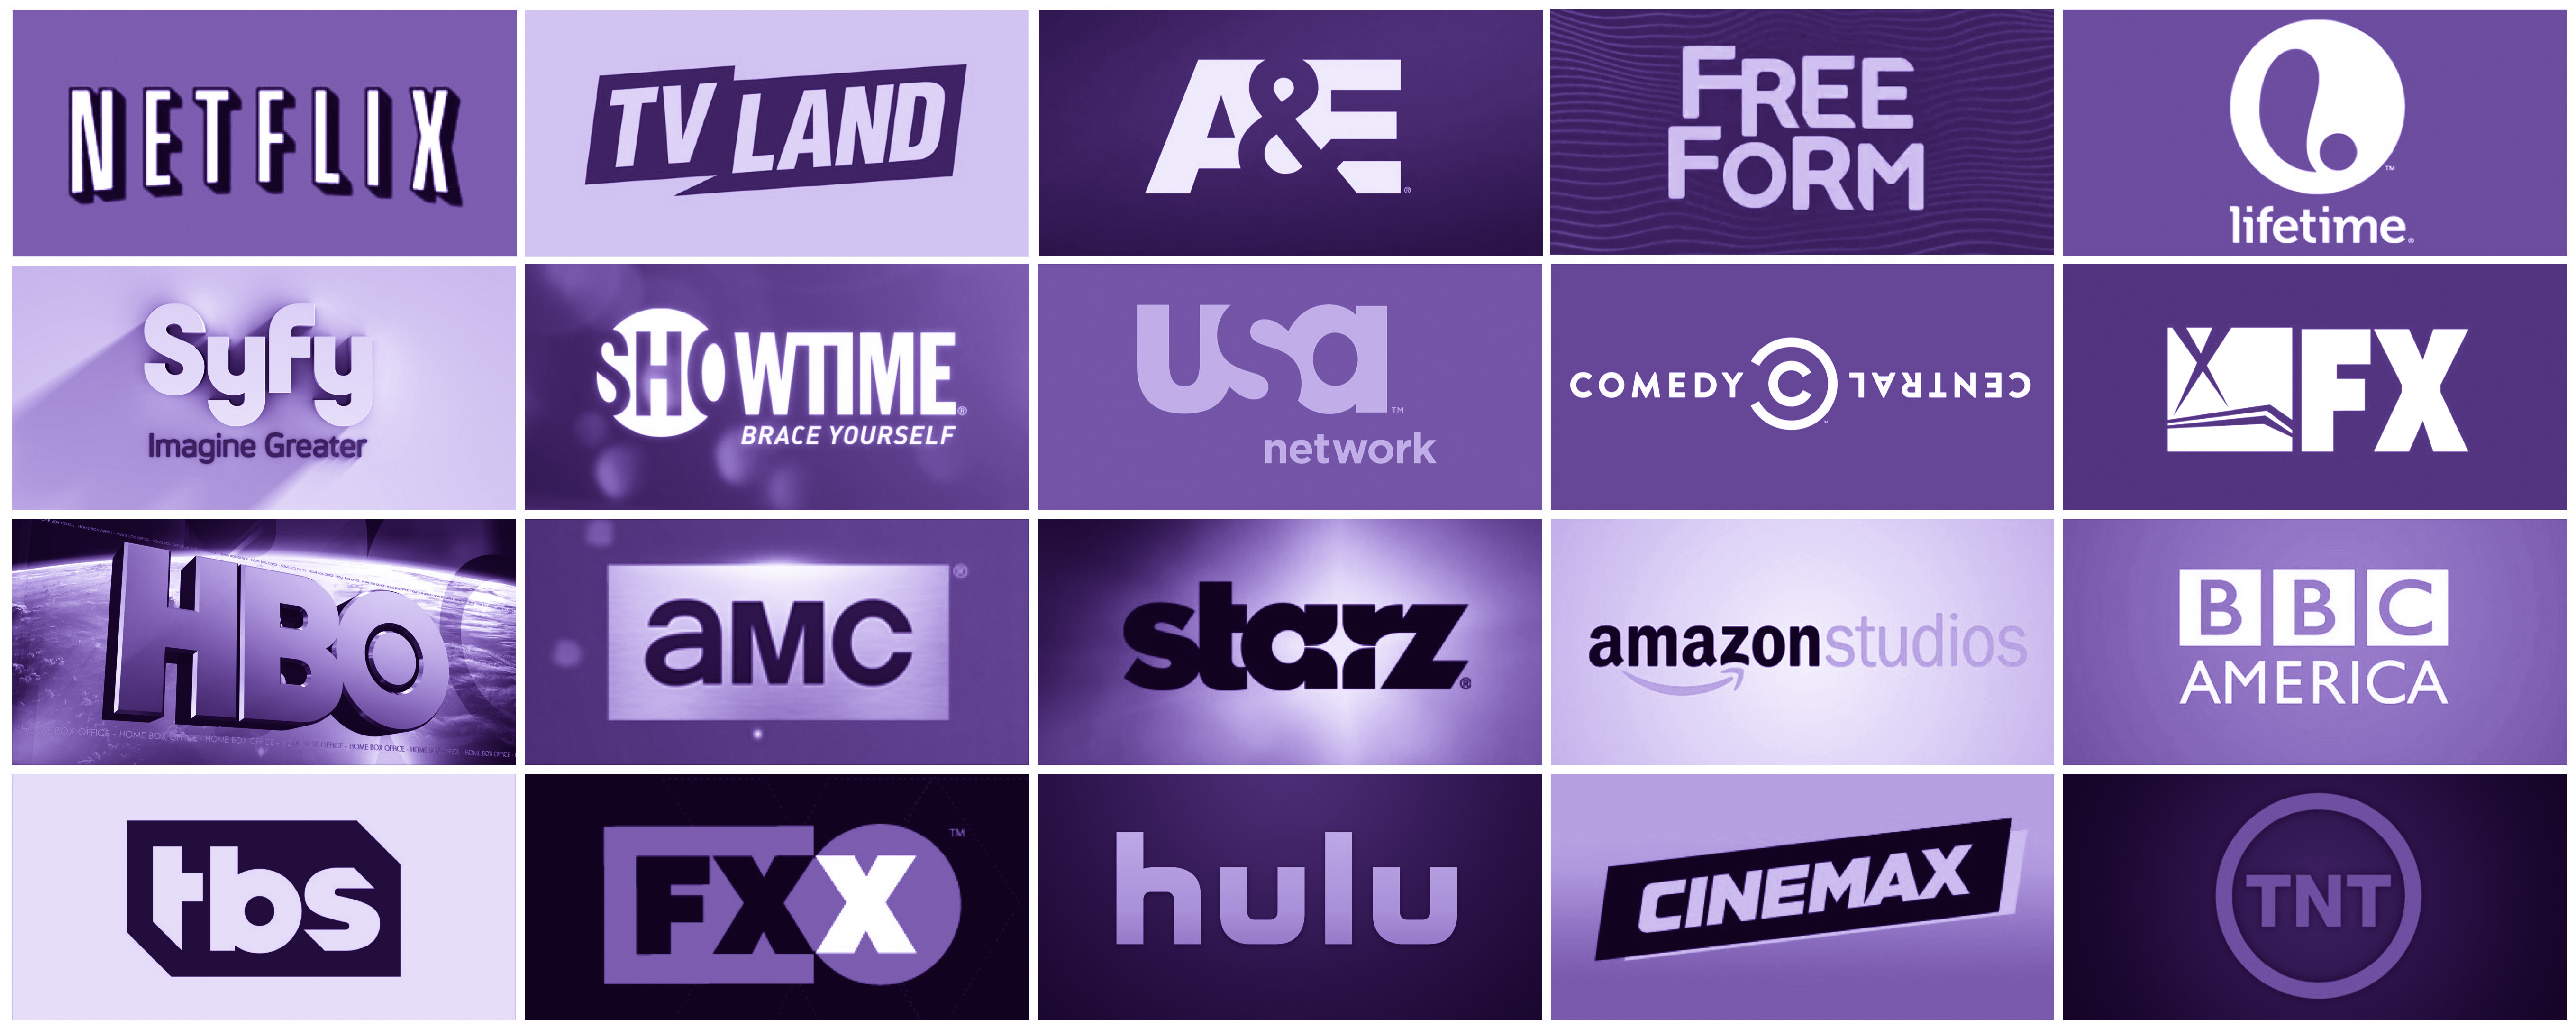 Cancelled or Renewed? Status of Cable & Streaming TV Shows (A-D) - canceled TV shows ...5435 x 2170